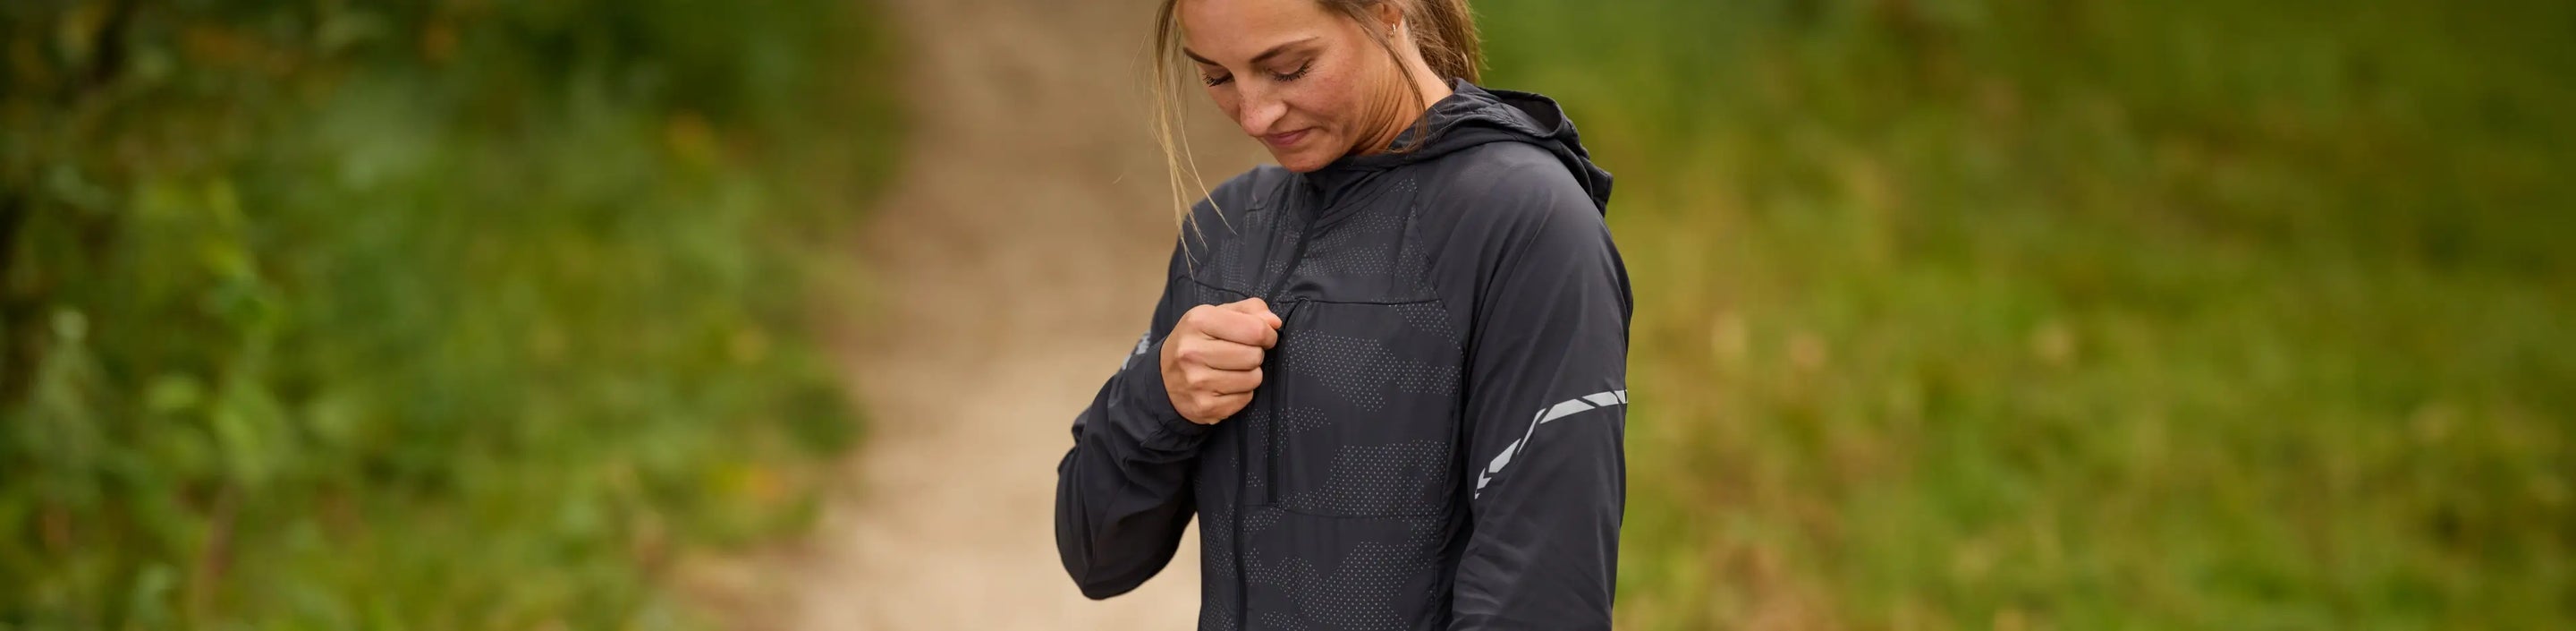 runner wearing a Nathan Sports Stealth Jacket in Black